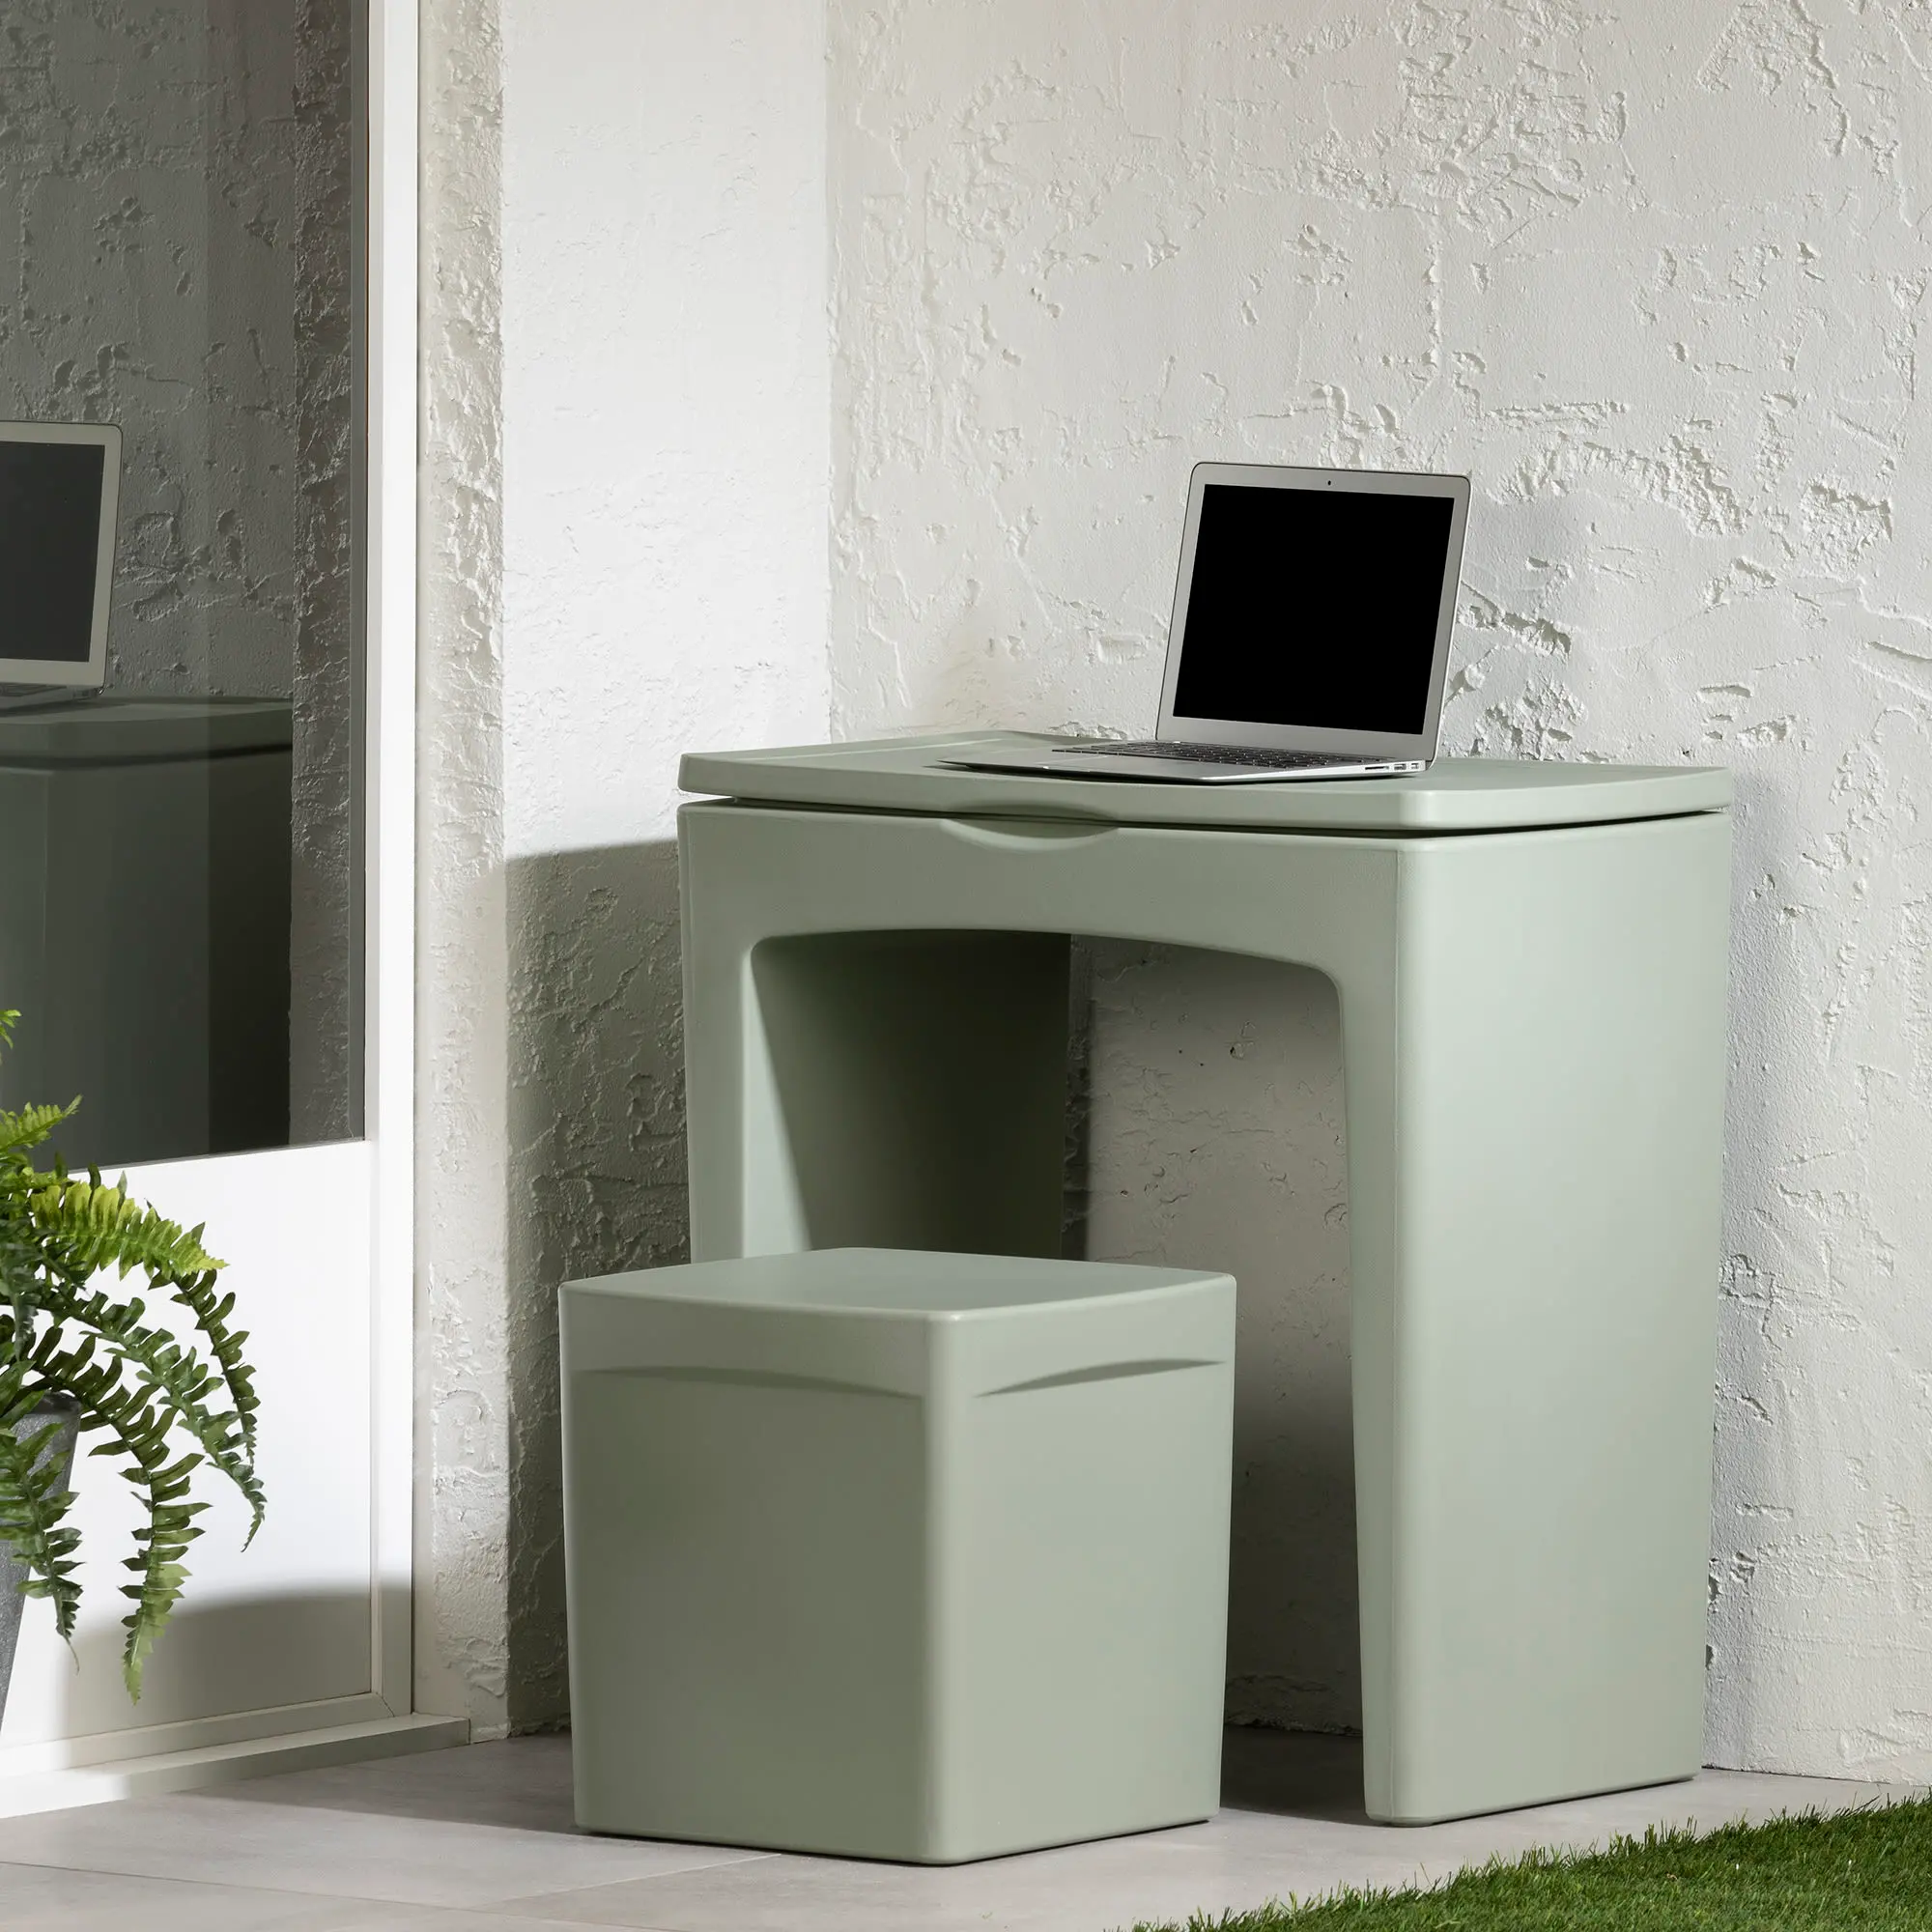 13789 Dalya Sage Green Small Outdoor Desk with Bench - S sku 13789